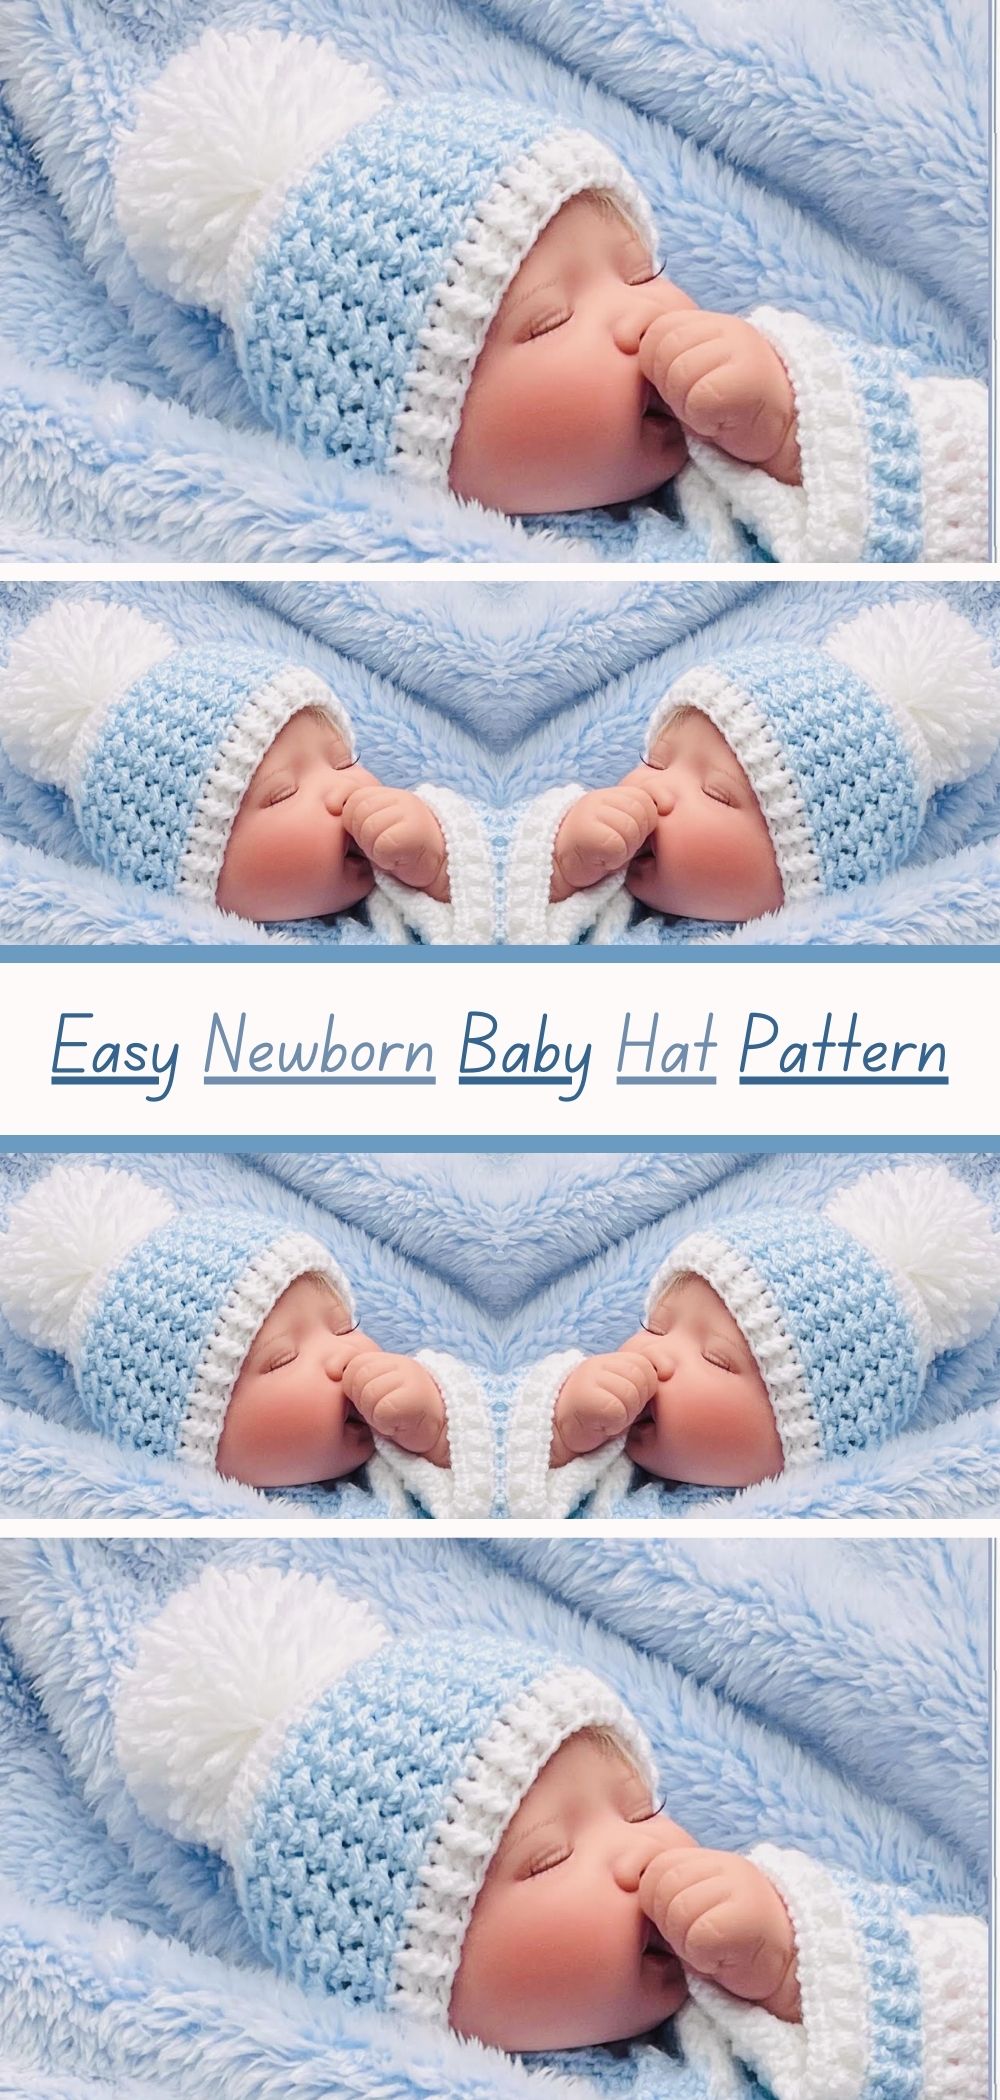 Simple DIY crochet pattern for easy newborn baby hat. Perfect for beginners. Keep your little one snug and cozy!